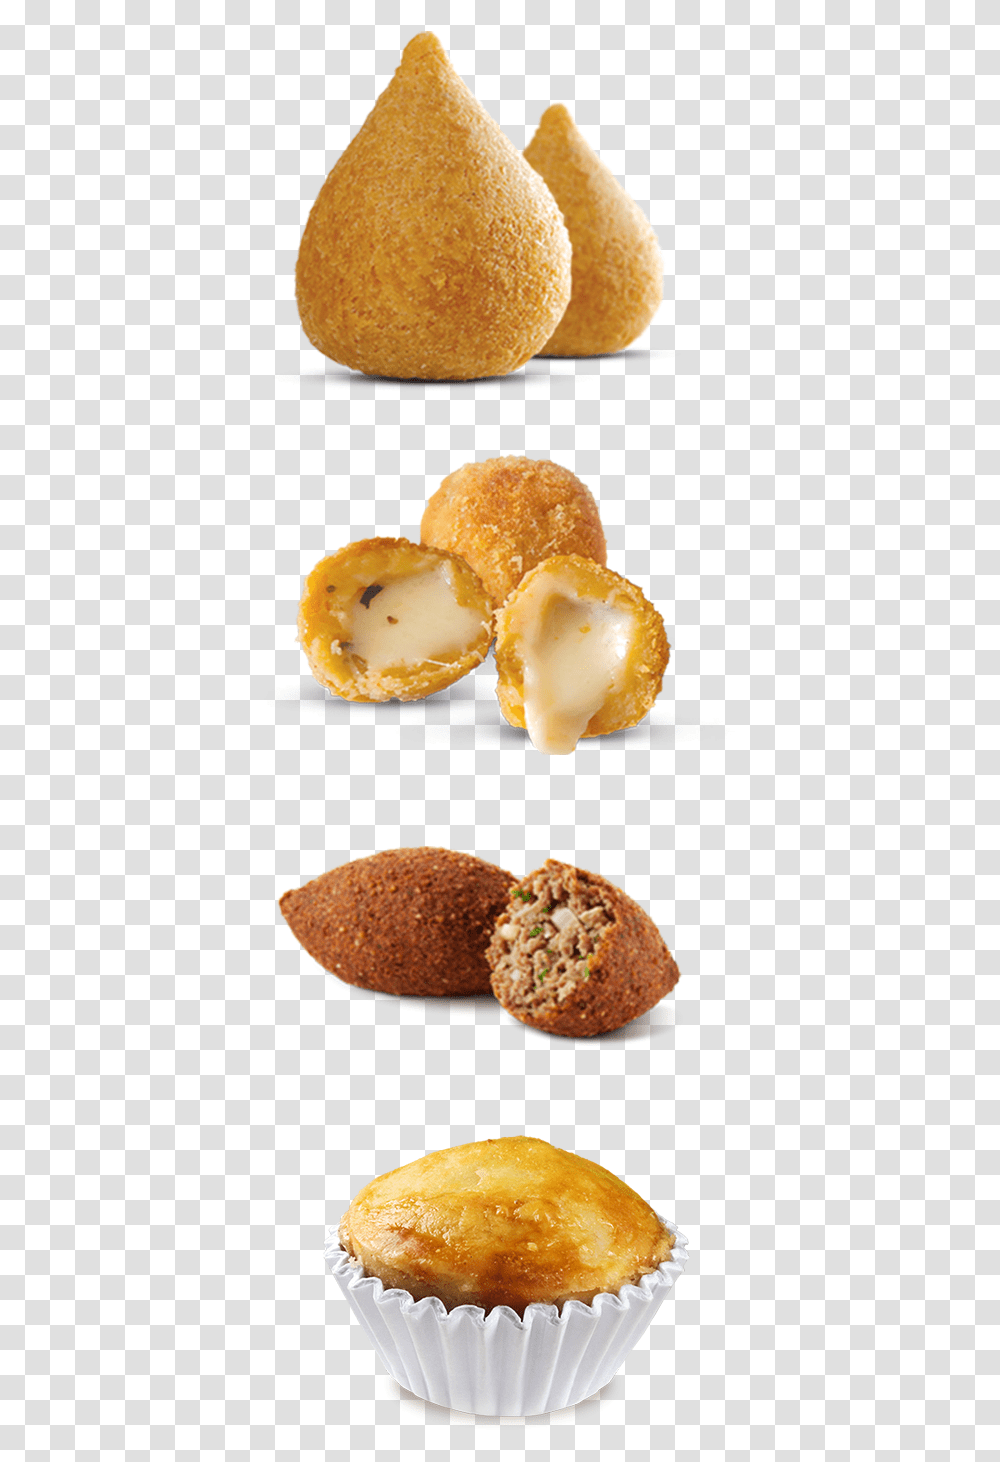 Baked Goods, Sweets, Food, Confectionery, Fried Chicken Transparent Png